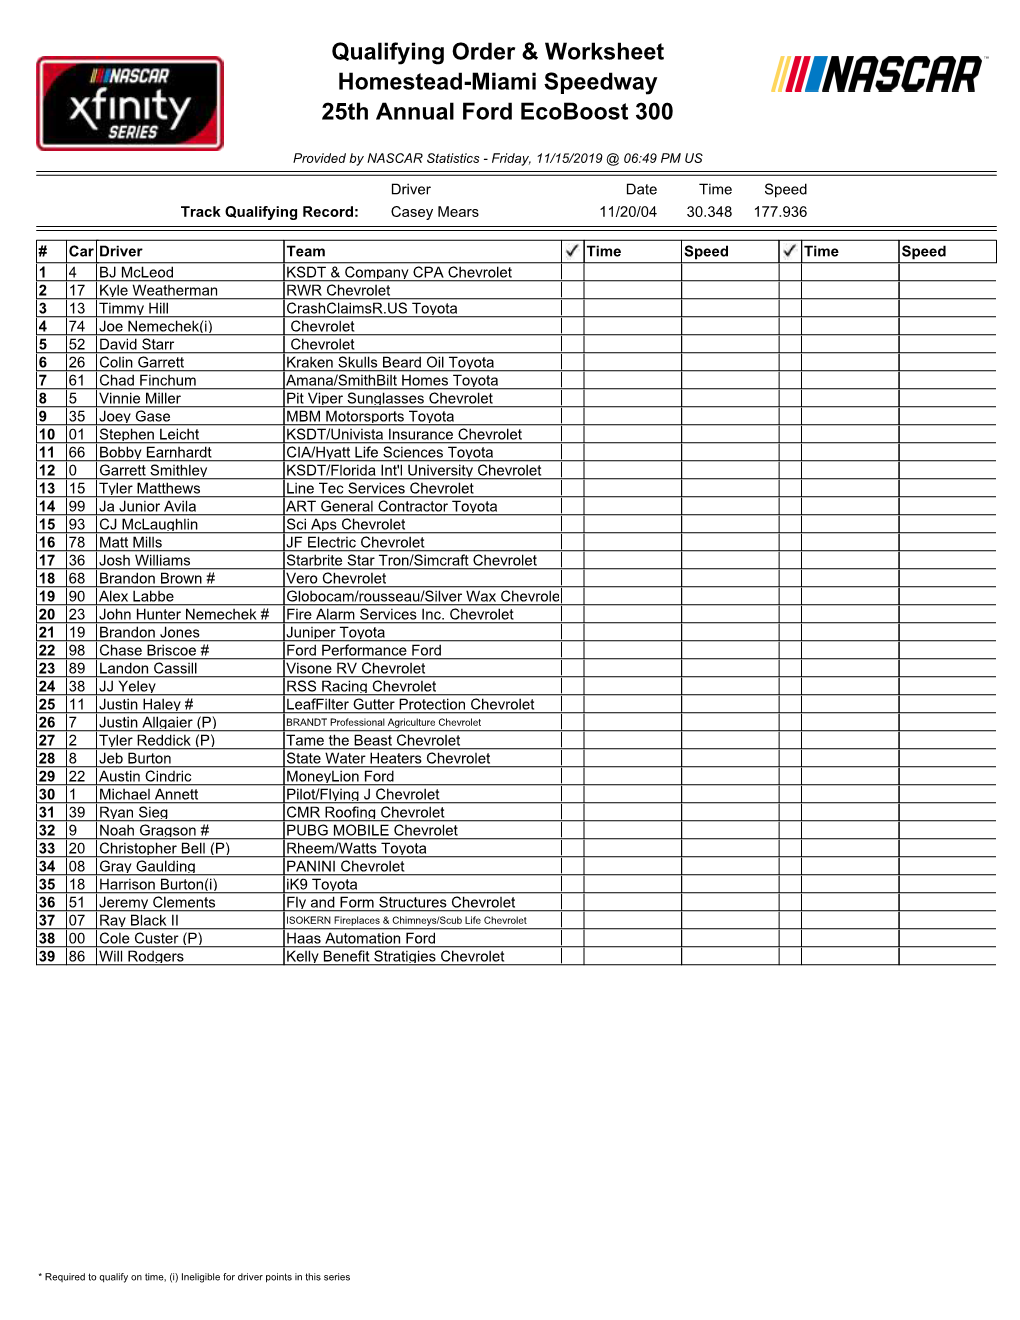 Qualifying Order & Worksheet Homestead-Miami Speedway 25Th Annual Ford Ecoboost 300